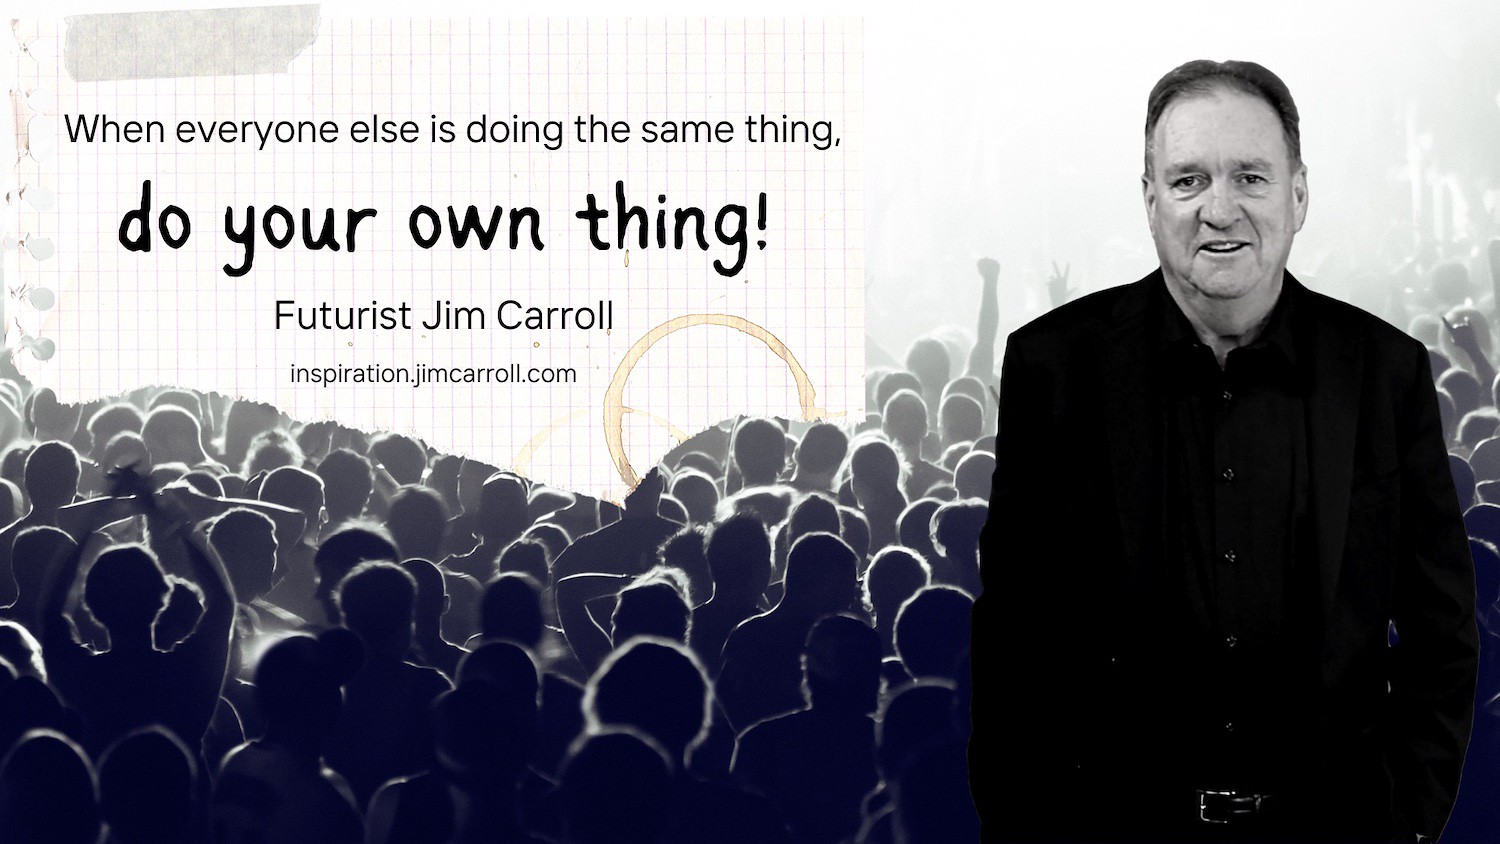 "When everyone else is doing the same thing, do your own thing!" - Futurist Jim Carroll